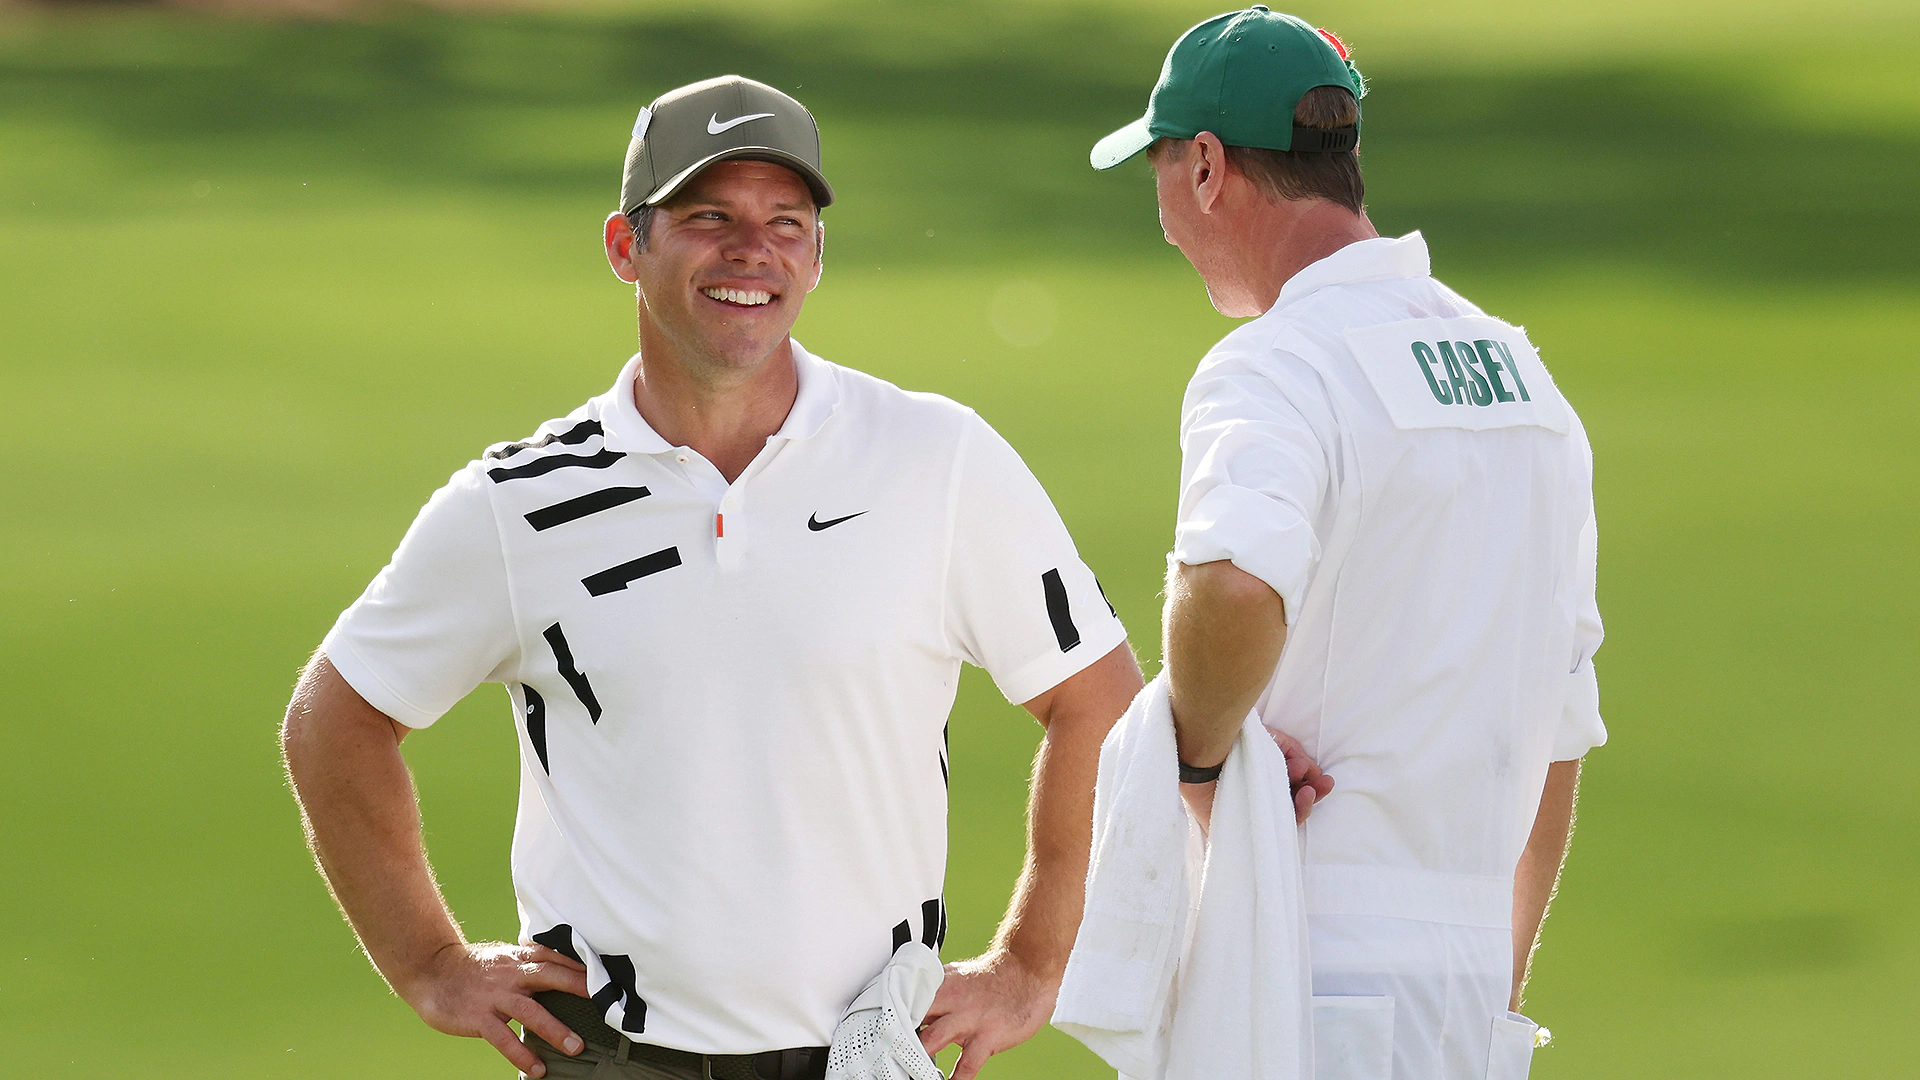 Paul Casey leads 2020 Masters Tournament as Day 1 suspended